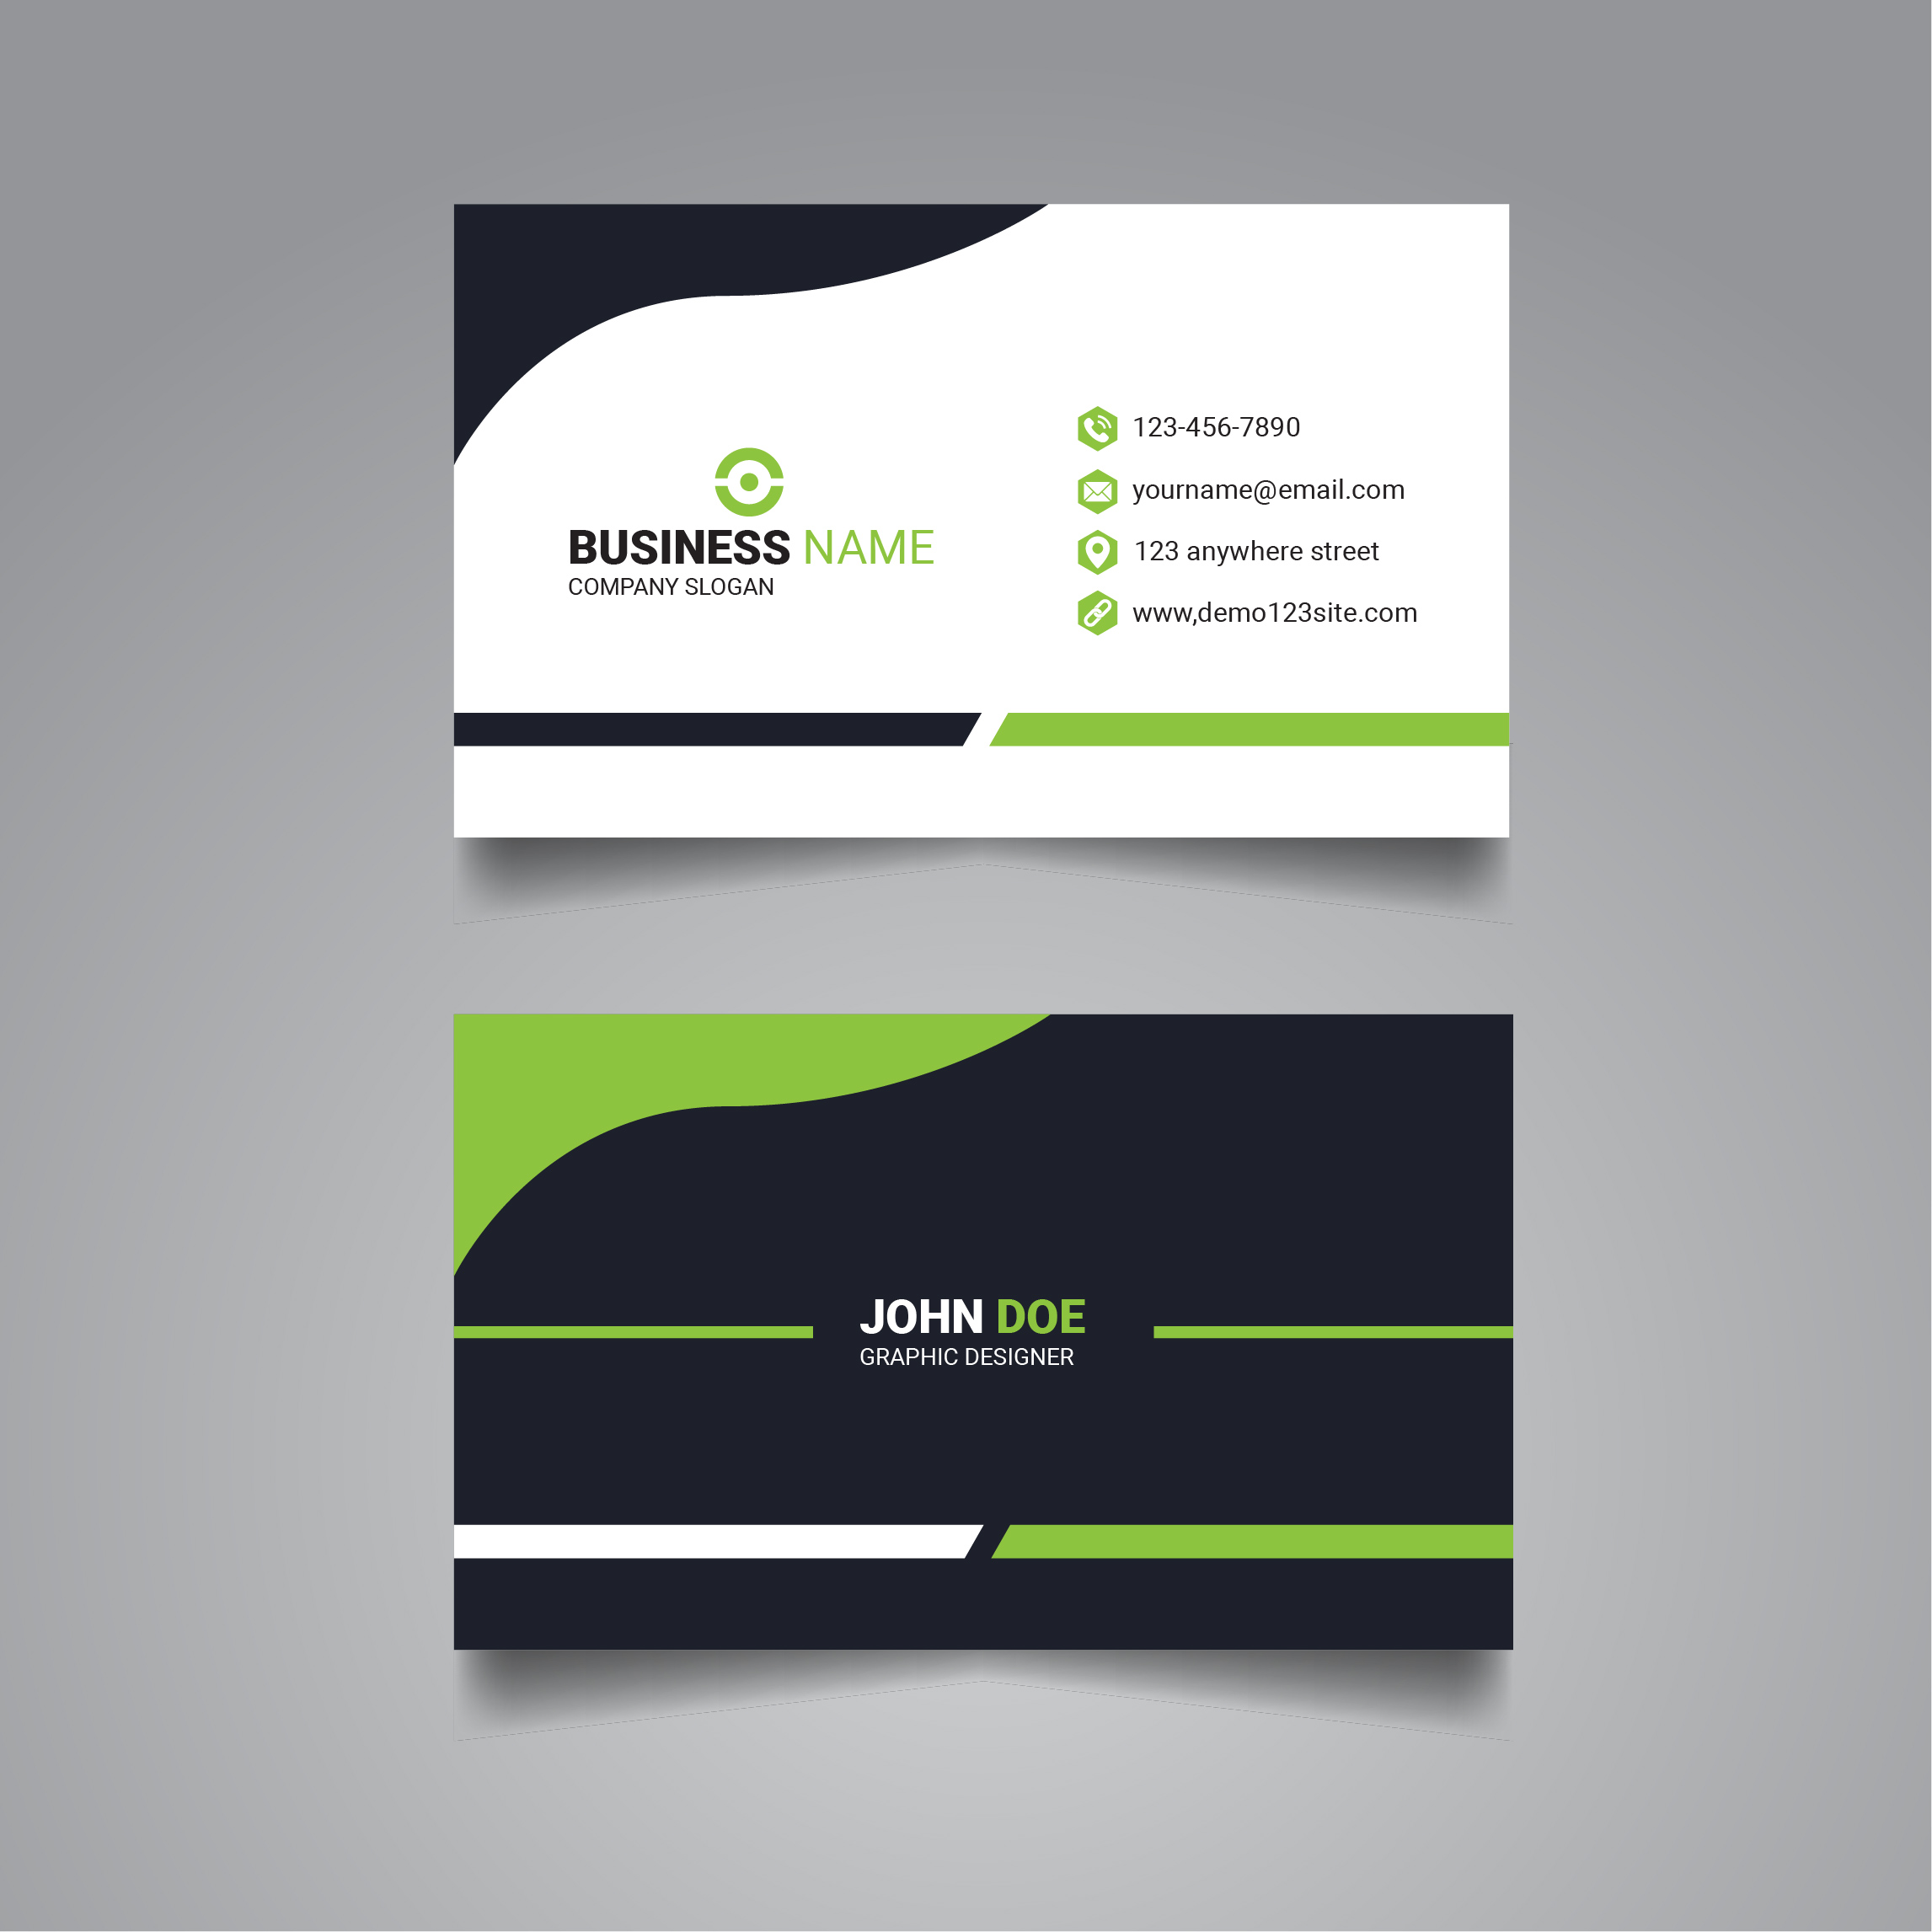 Professional modern business card template design cover image.